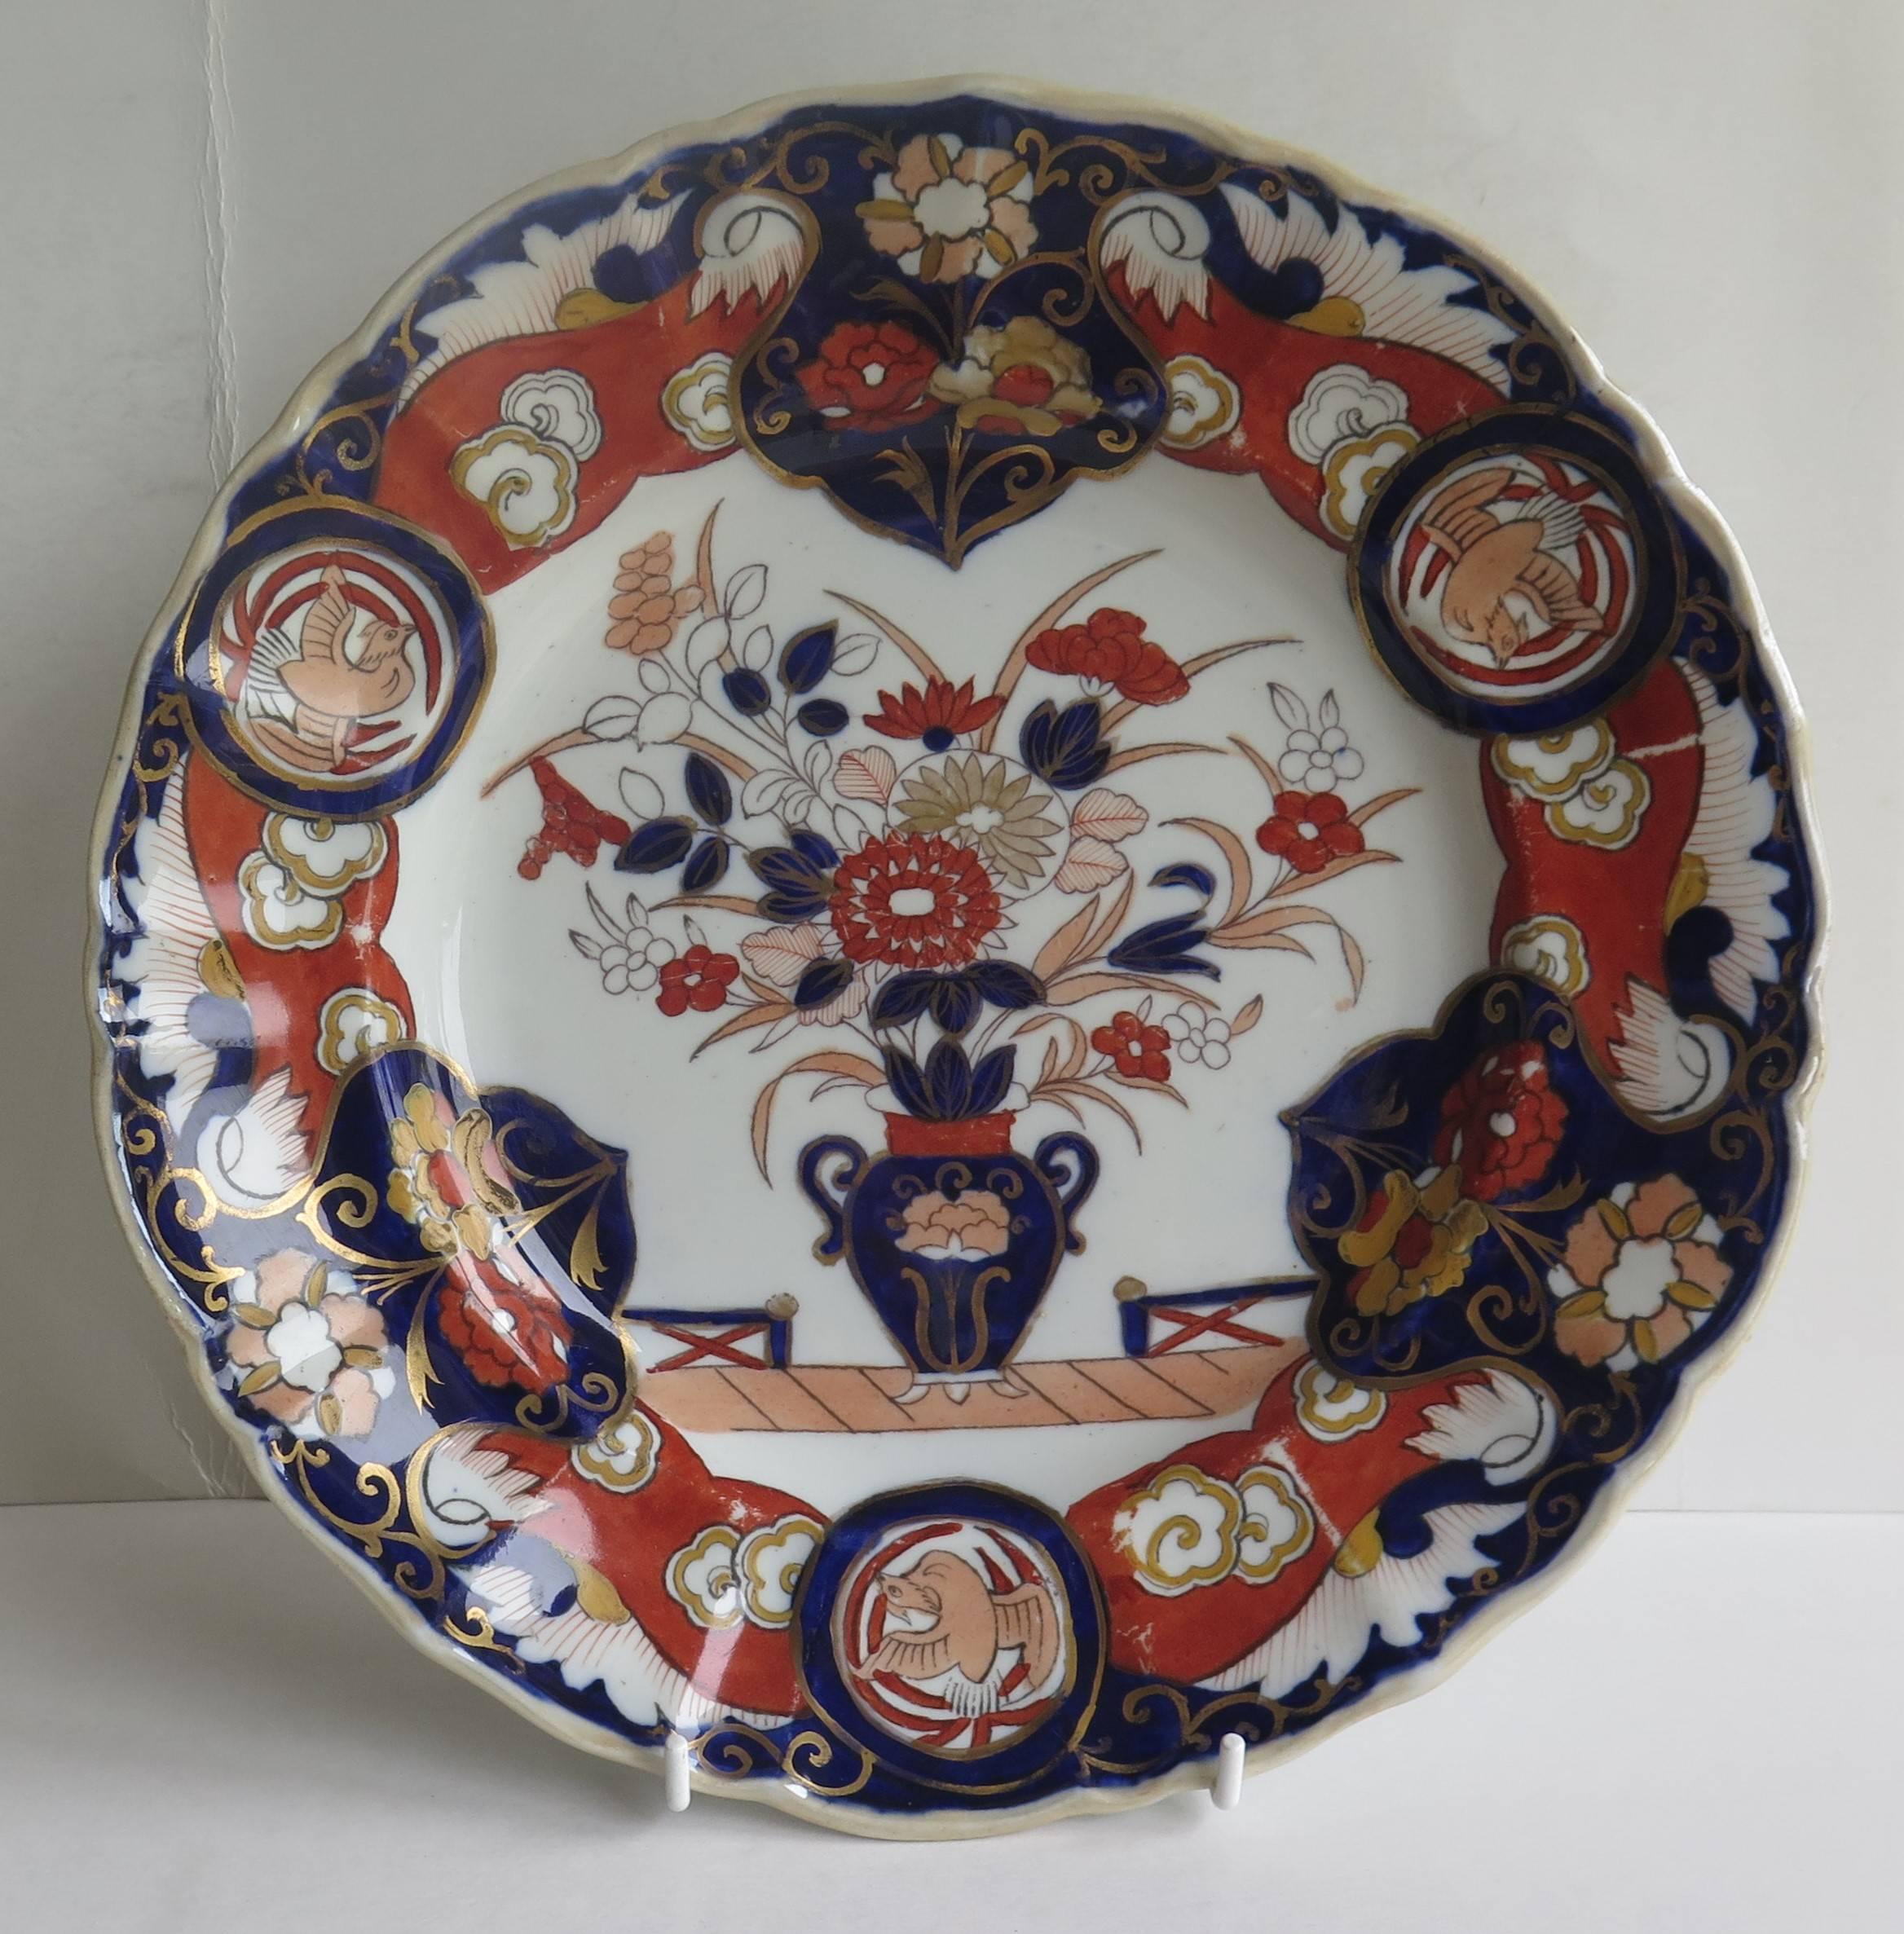 This is a very attractive large Dinner Plate made by the Mason's Patent Ironstone China Pottery Company in the early part of the 19th Century.

This plate is decorated in the: Fence Vase and Dove pattern, which shows a central flower filled vase,